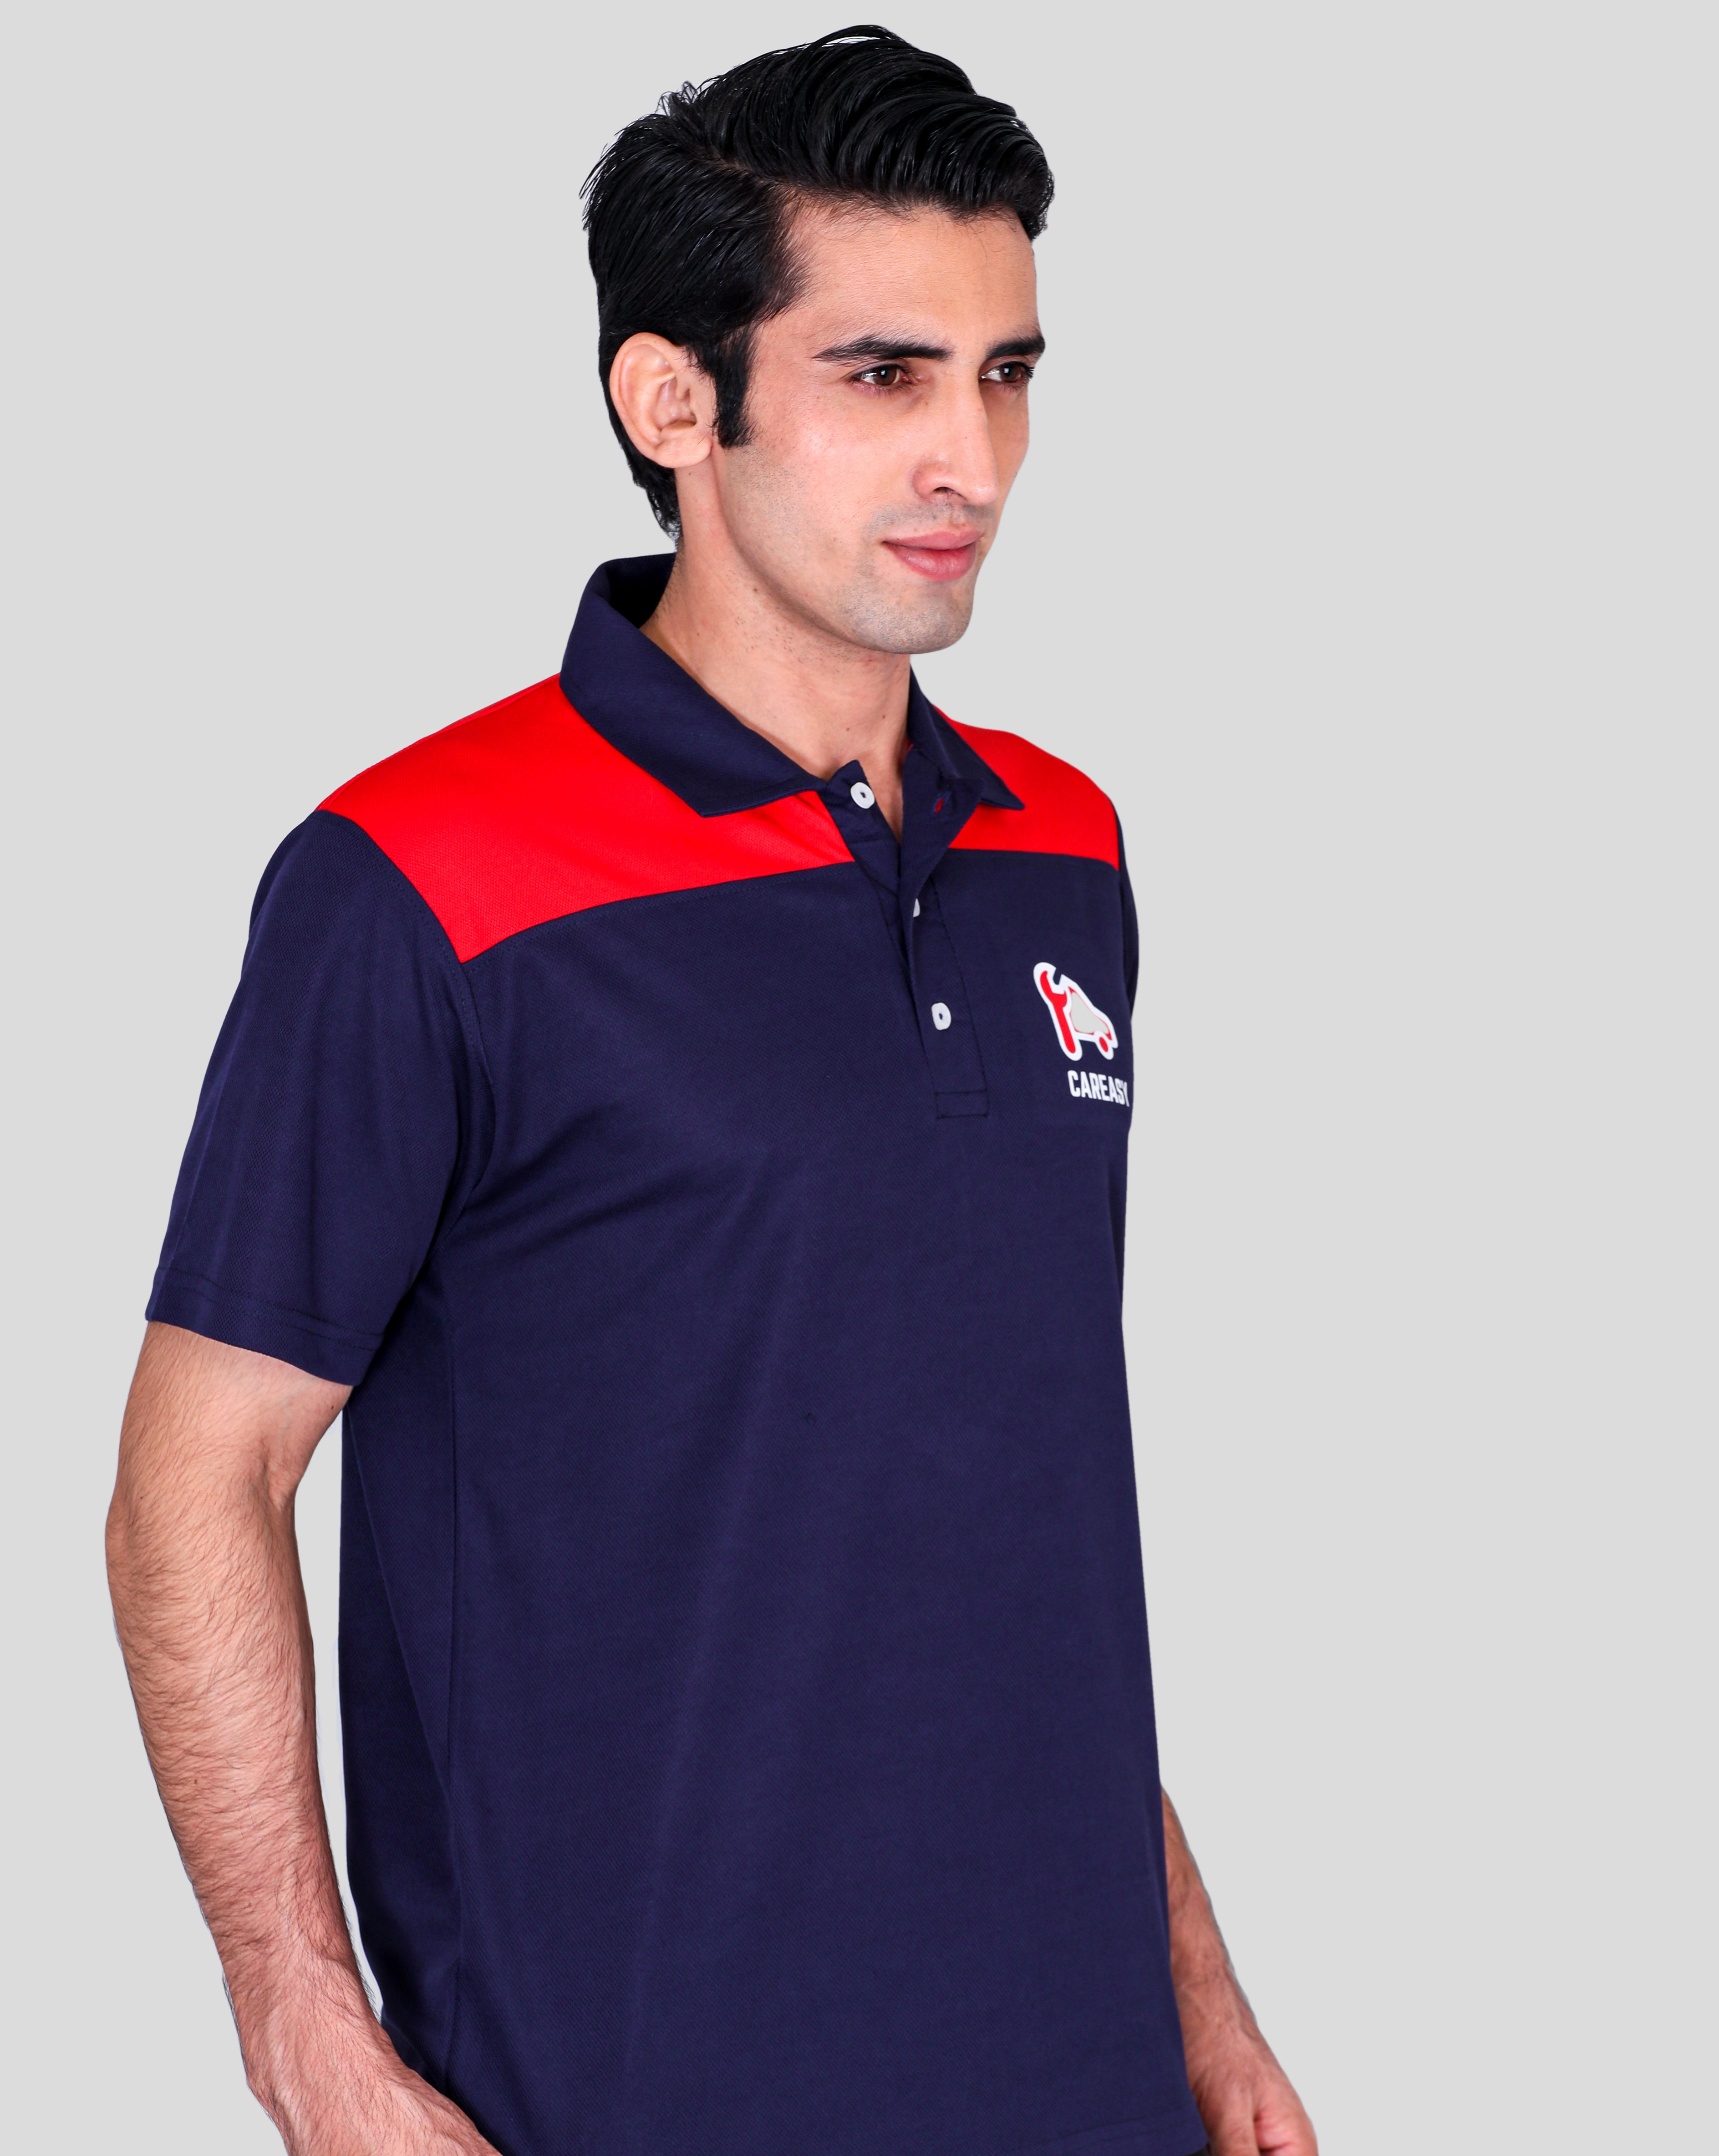 Blue and red dual colour customized corporate dry fits t-shirts 